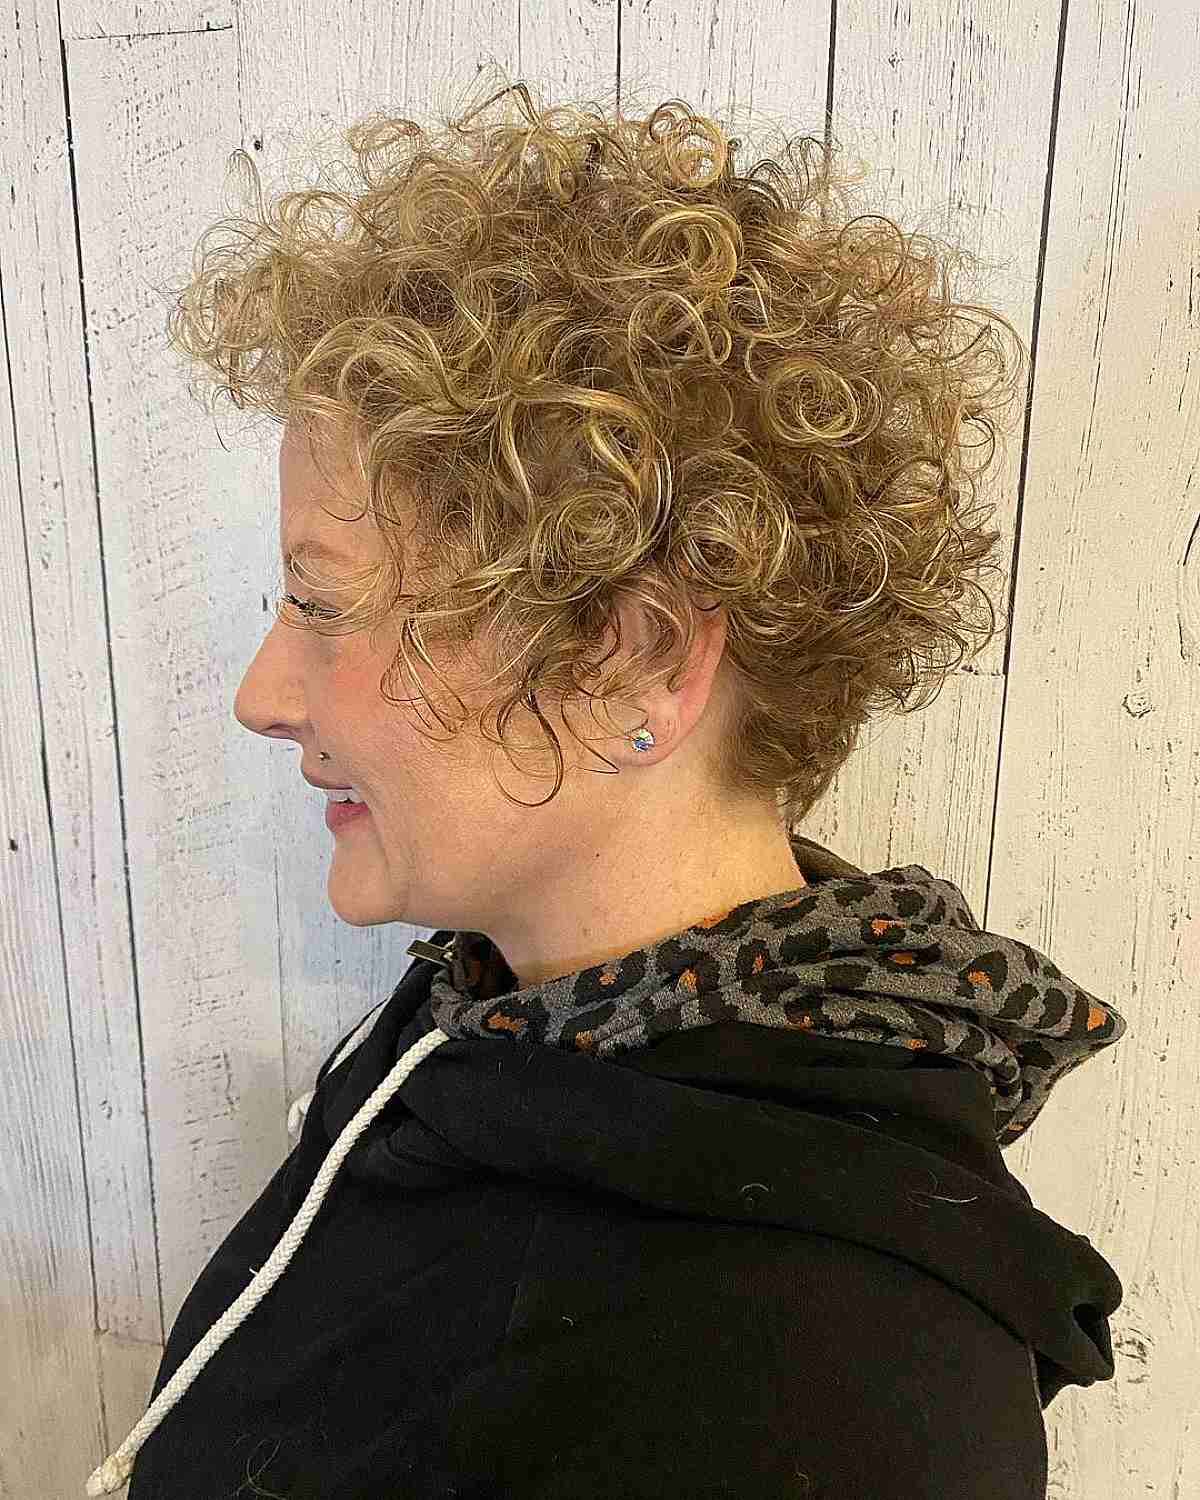 Short Pixie Cut on Tousled Curly Hair